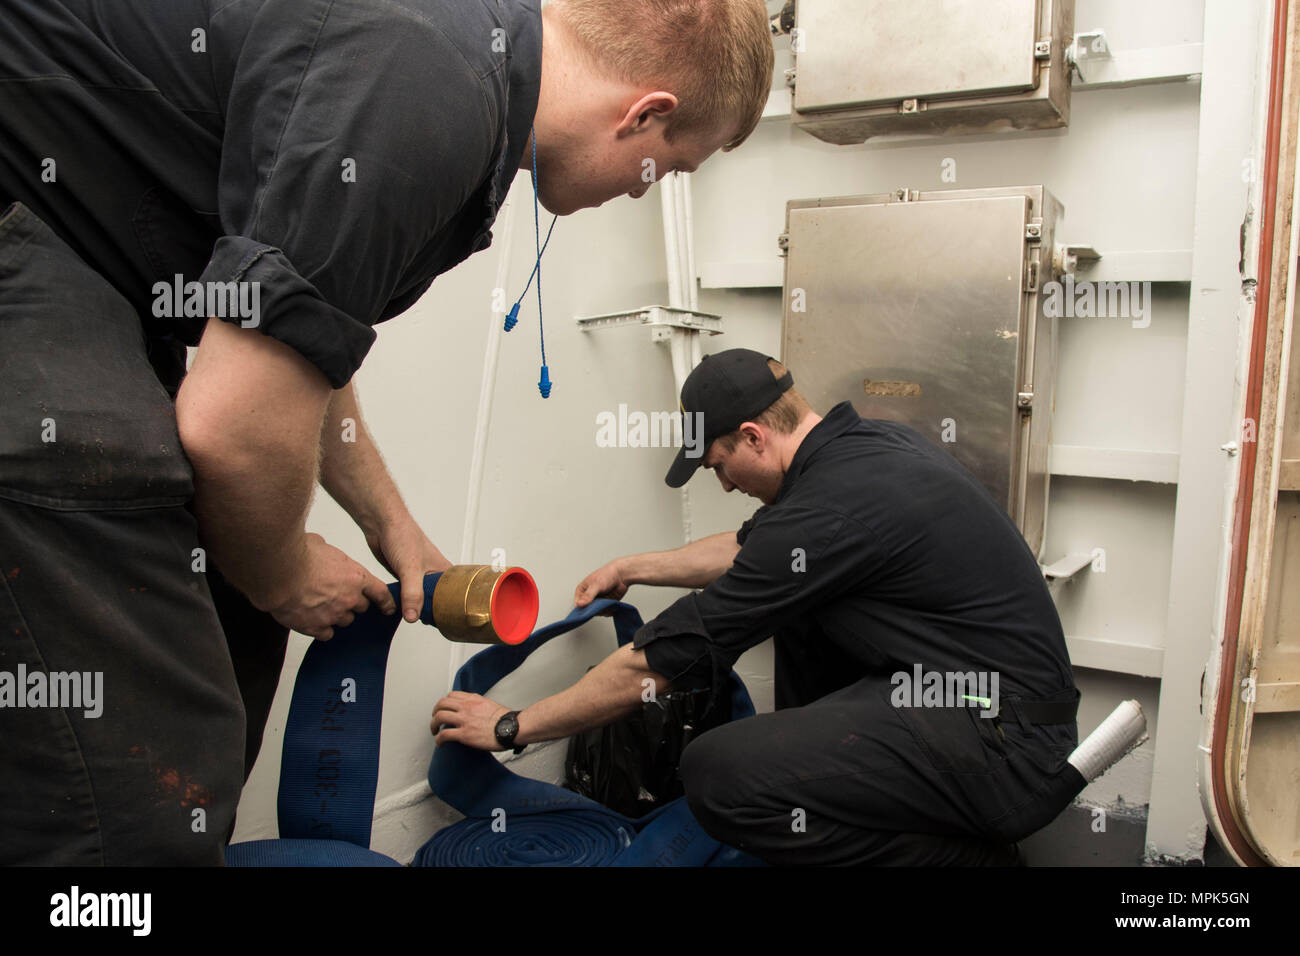 170322-N-KJ380-033  ATLANTIC OCEAN (March 22, 2017) Machinist's Mate 2nd Class Brian Darmstadt, from Elyria, Ohio, and Machinist's Mate 3rd Class Devon Lane, from Lexington, S.C., soak hoses for a hot water rig in a passageway aboard the aircraft carrier USS Dwight D. Eisenhower (CVN 69) (Ike). Ike is currently conducting aircraft carrier qualifications during the sustainment phase of the Optimized Fleet Response Plan (OFRP). (U.S. Navy photo by Mass Communication Specialist Seaman Neo Greene III) Stock Photo